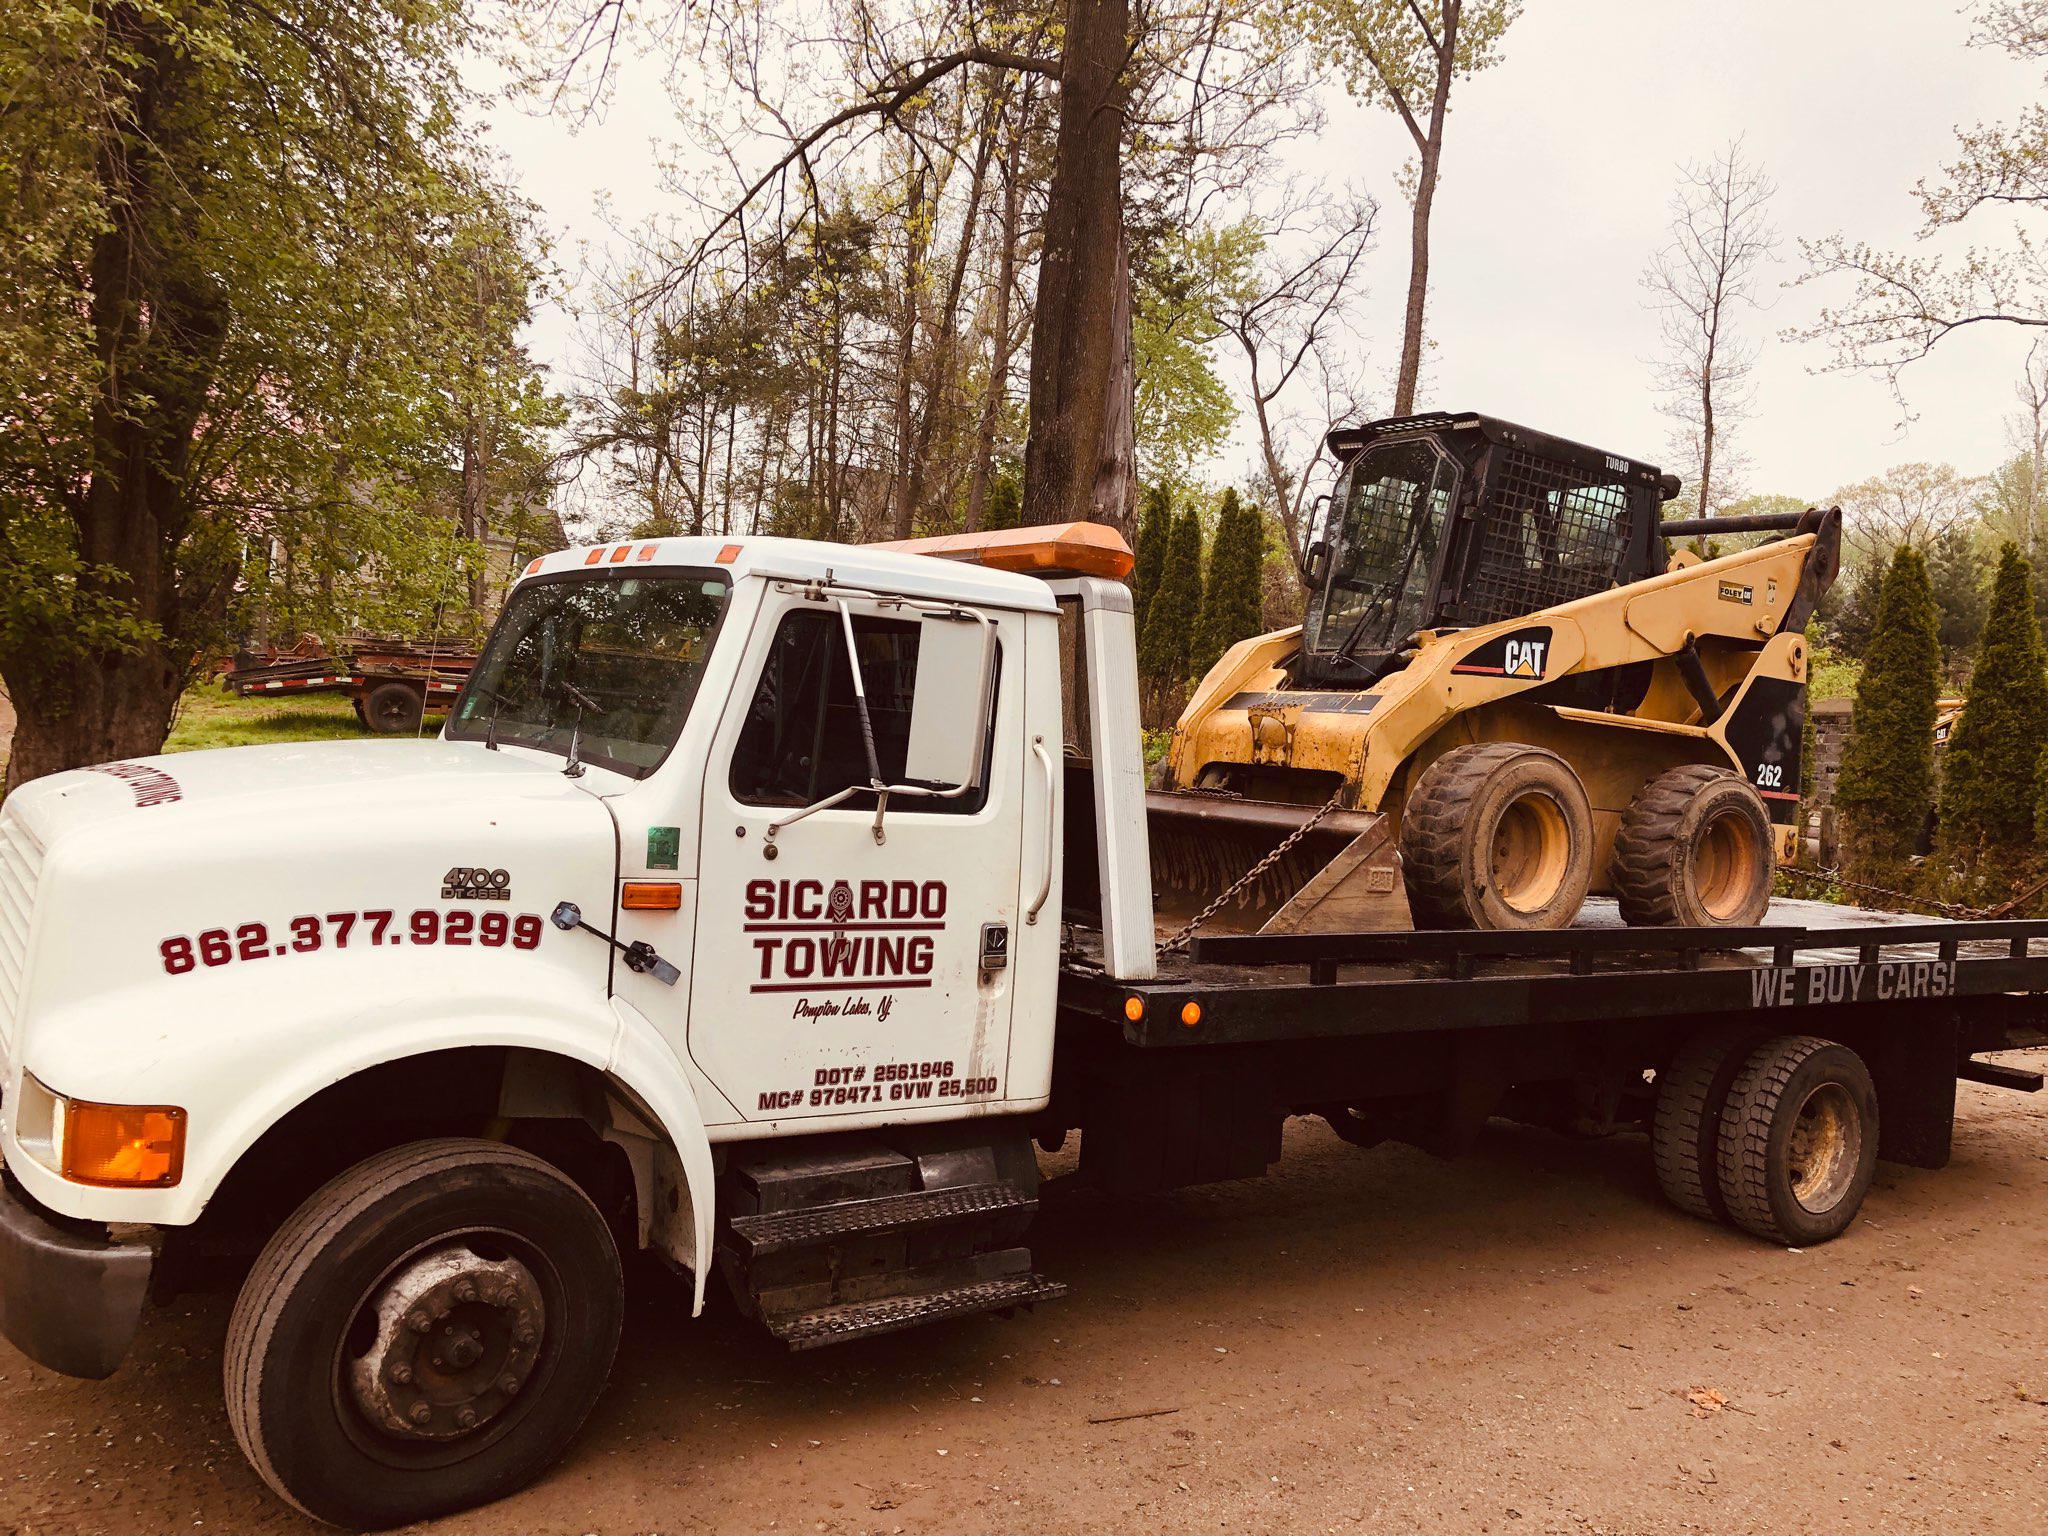 Need to tow some construction equipment? Our truck can handle large and small tows!